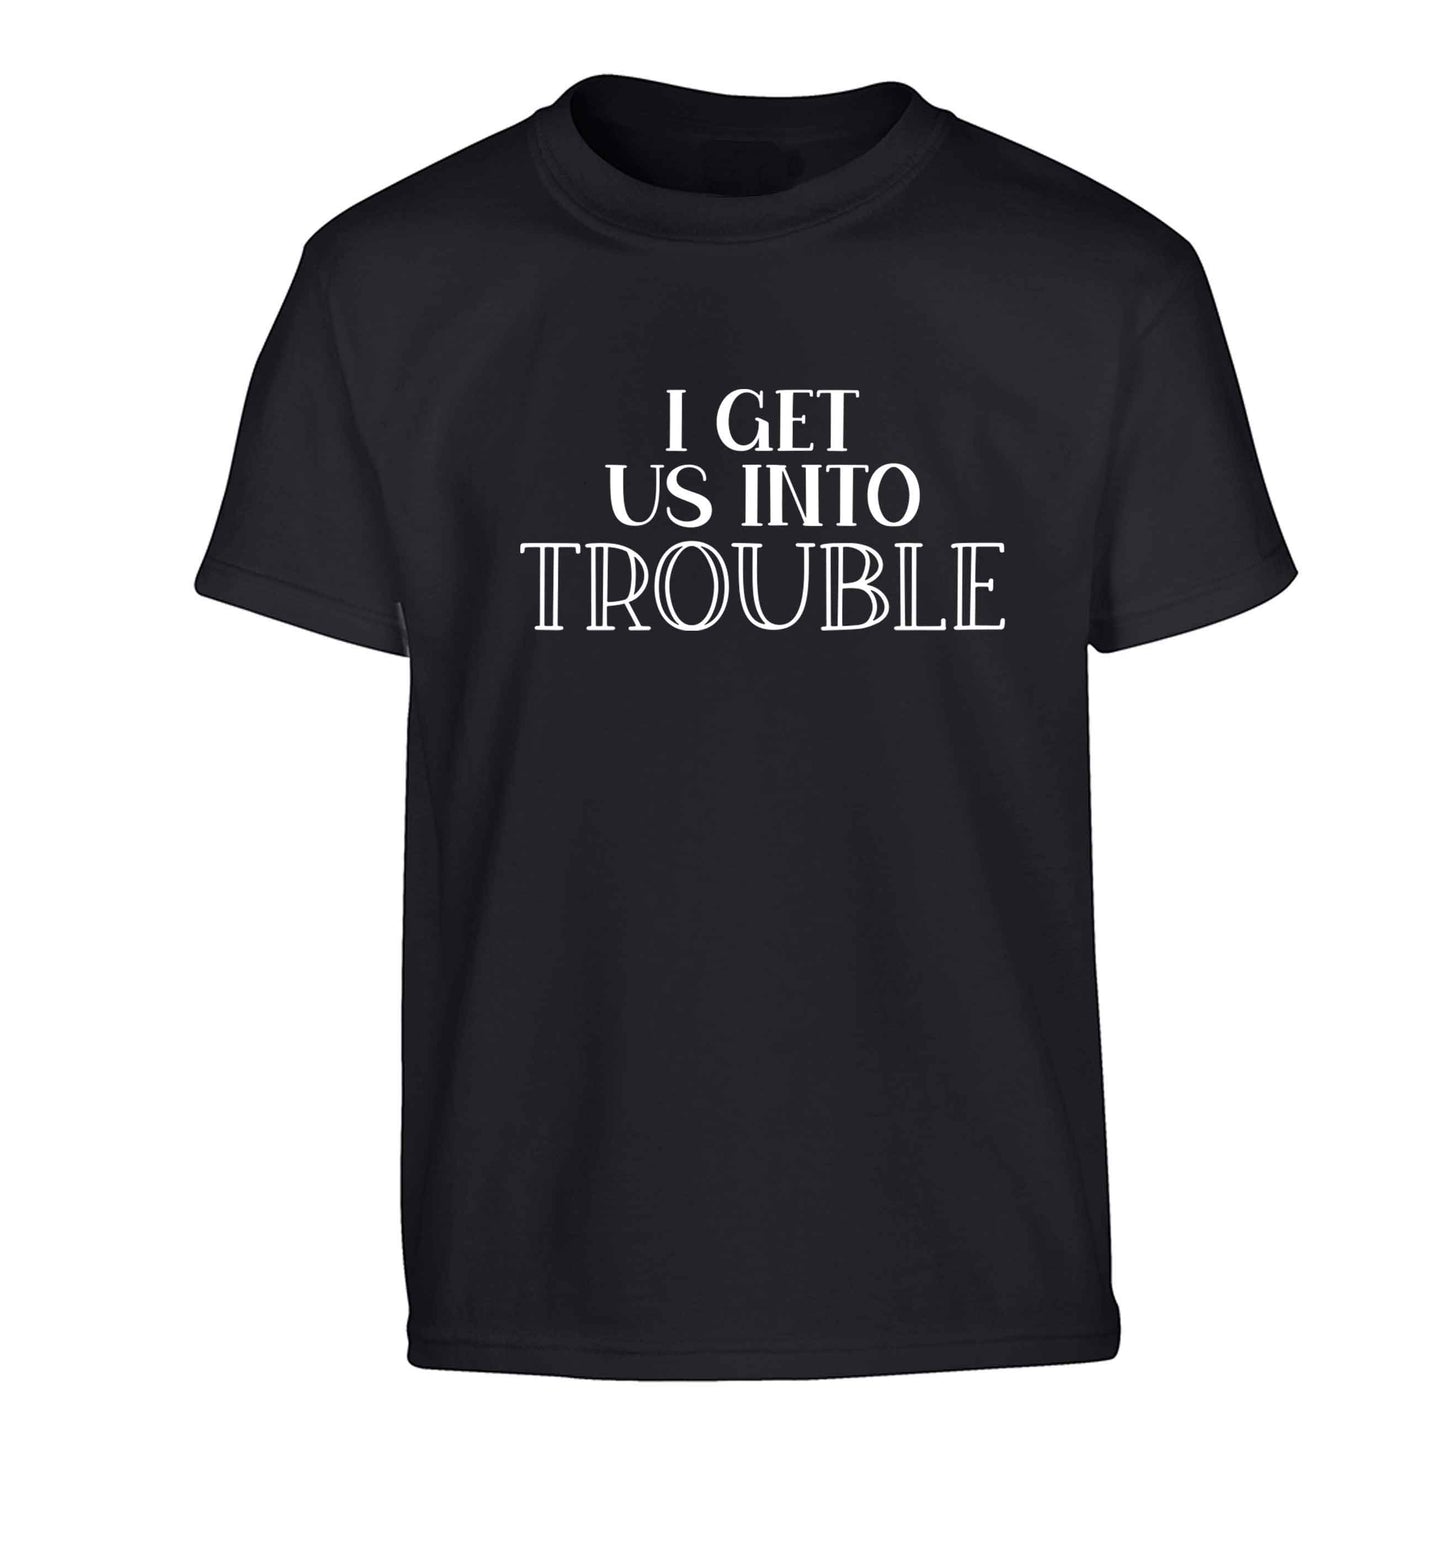 I get us into trouble Children's black Tshirt 12-13 Years